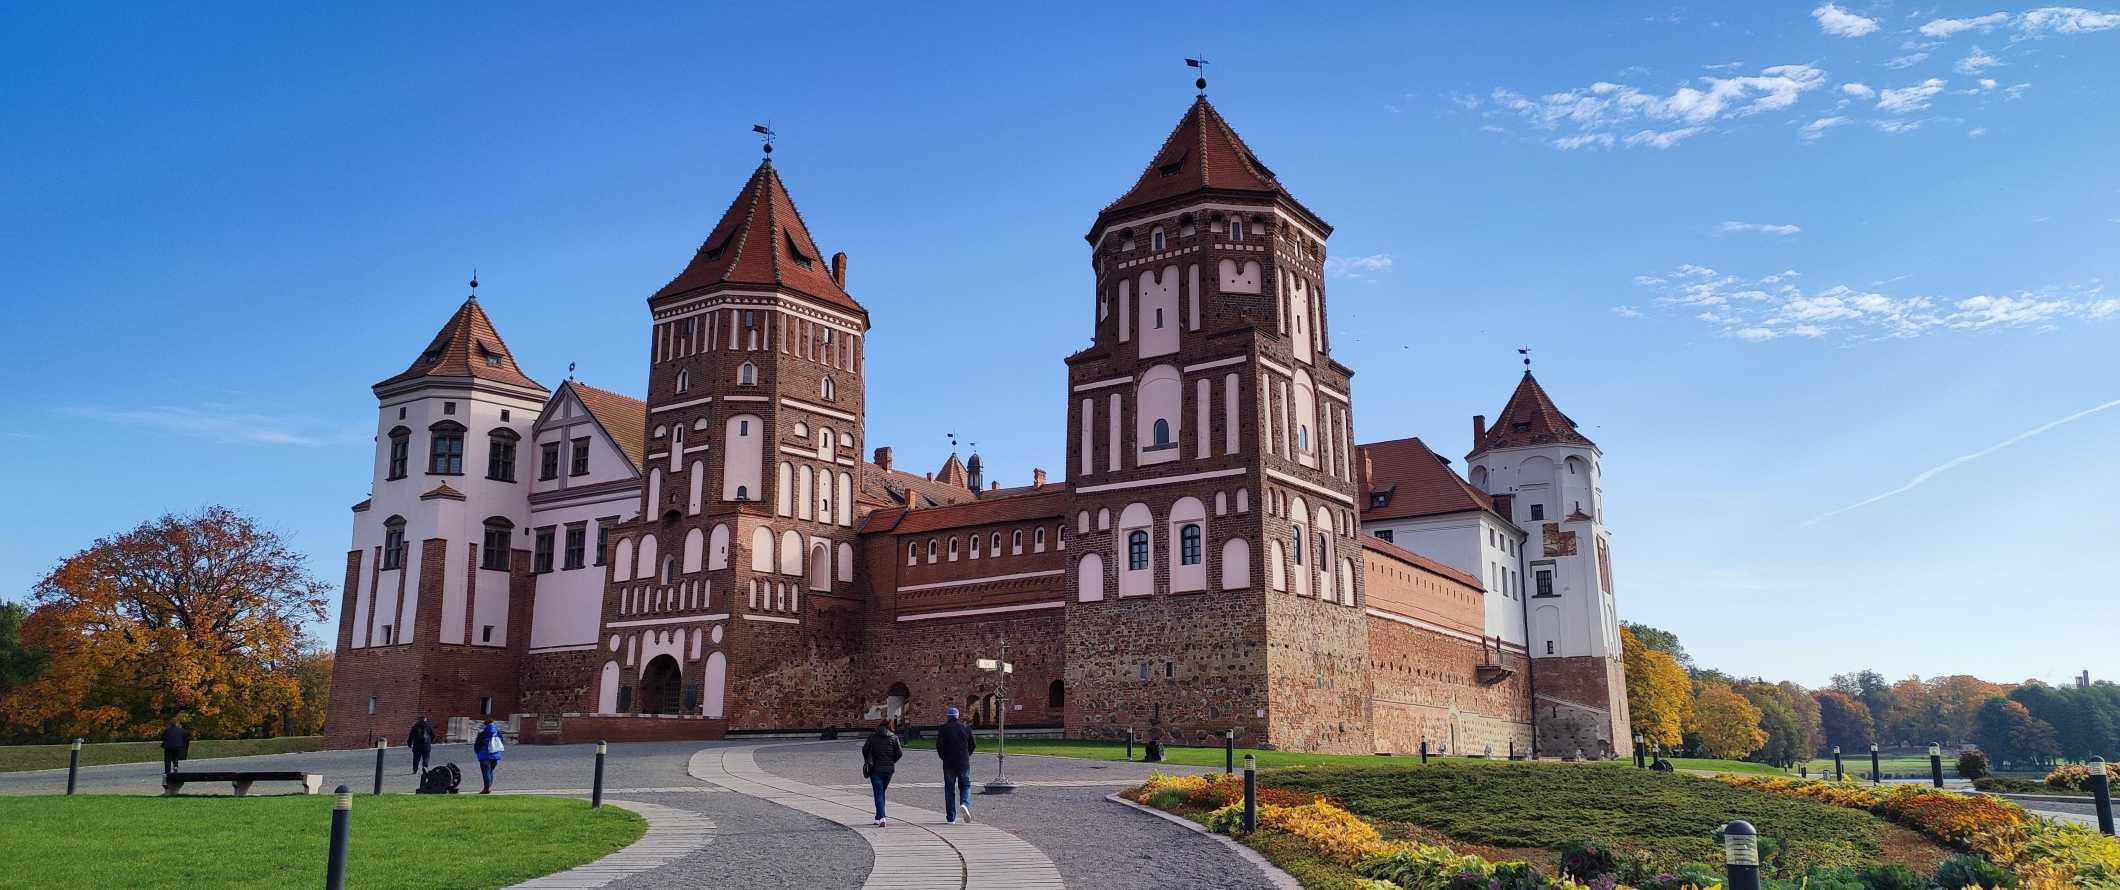 People walking up a sloping path leading to Mir Castle, an imposing red brick castle in Belarus